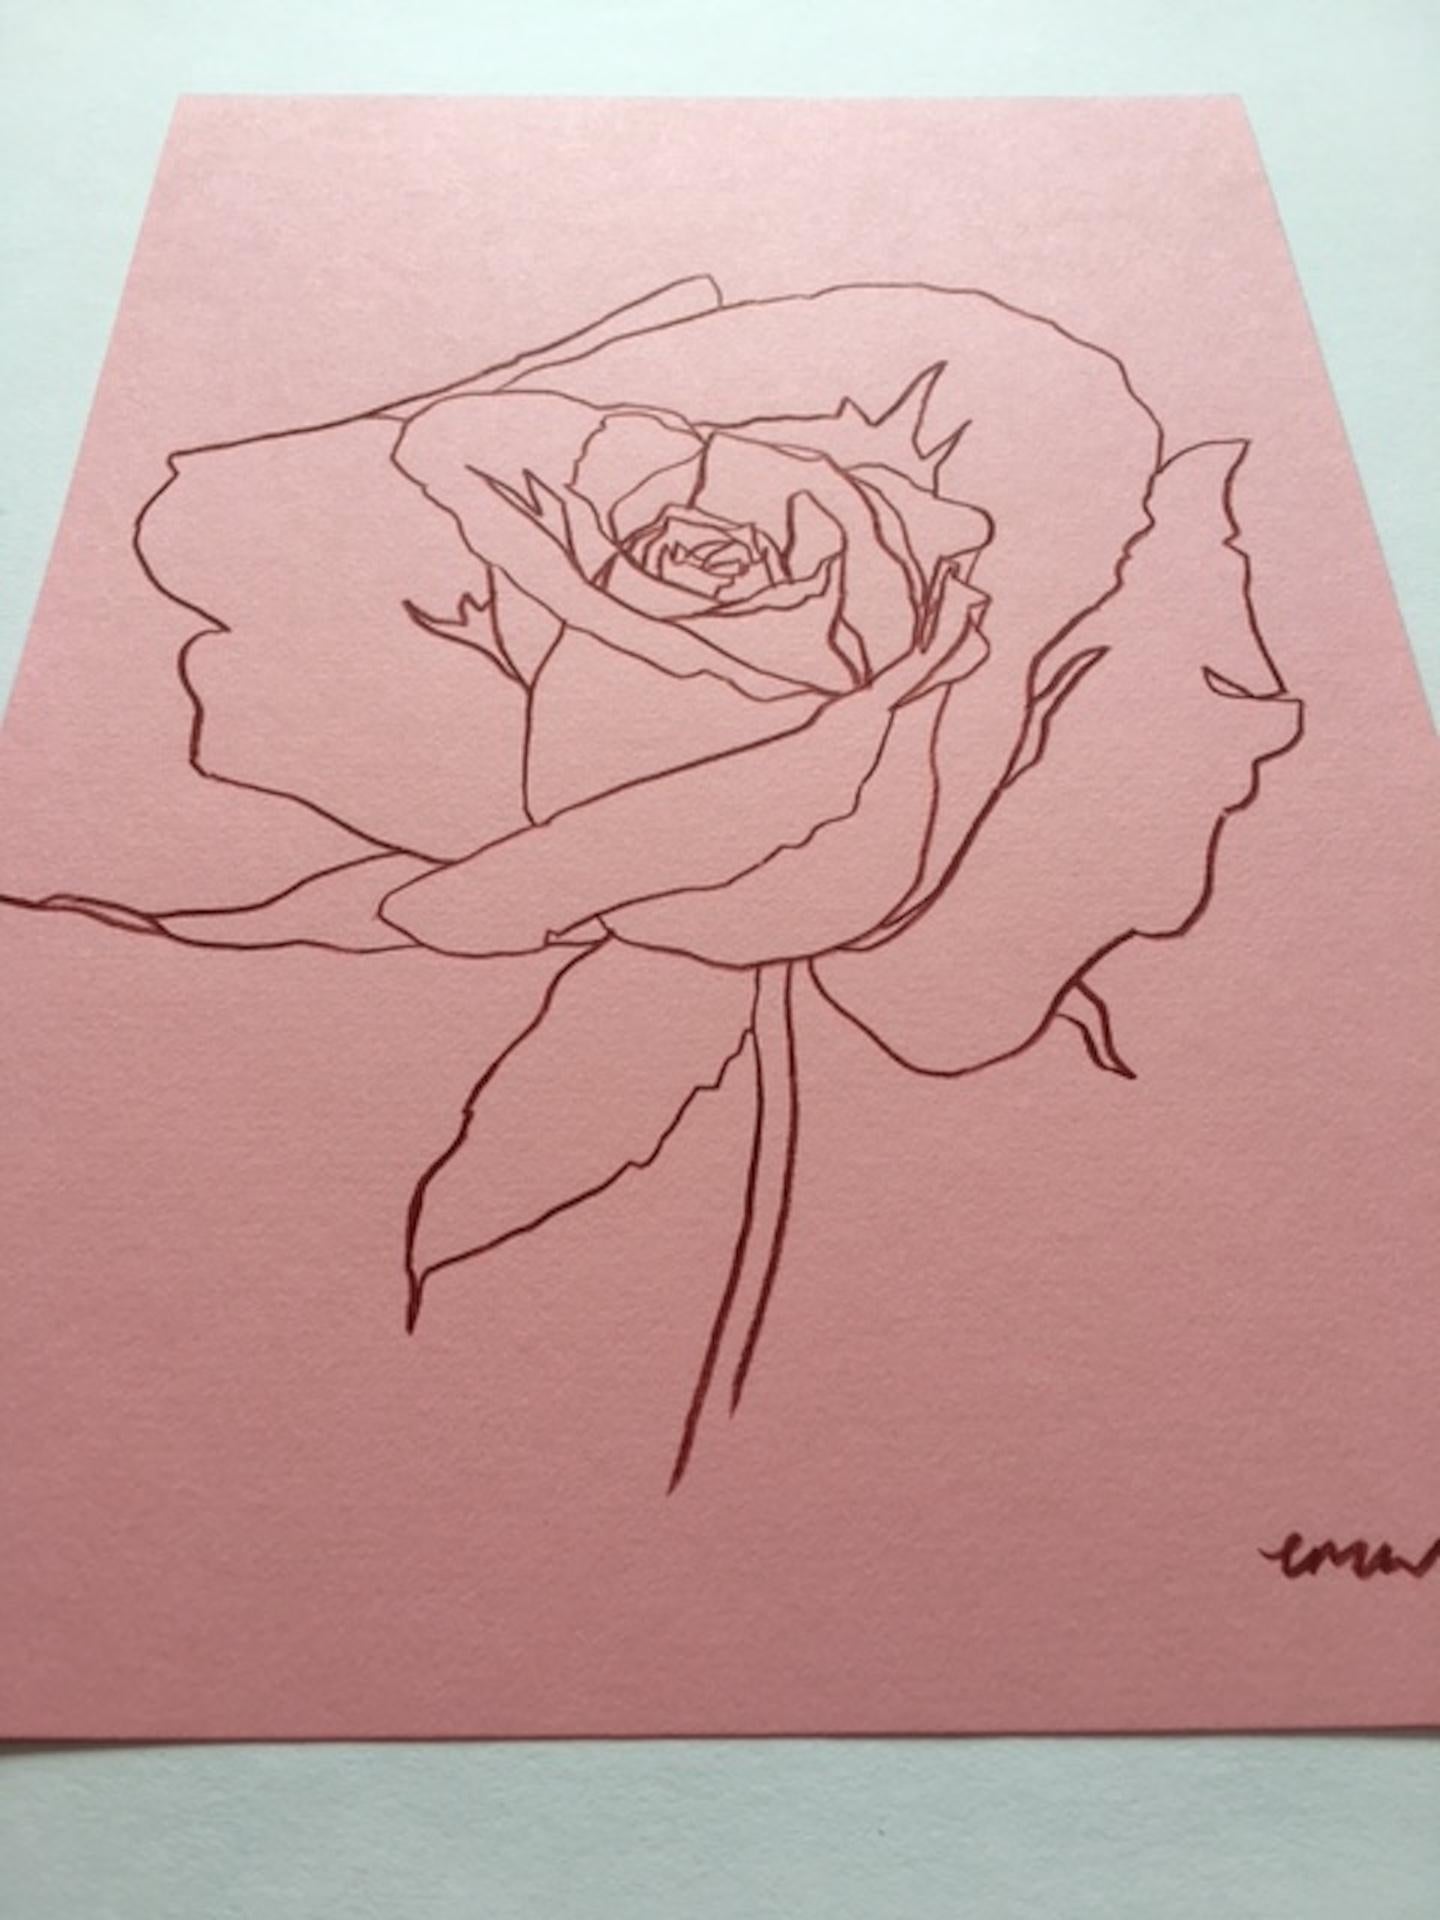 Ellen Williams
Rose VIII
Original drawing – coloured pencil on A4 150gsm paper

This drawing is one in a series of botanical line drawings depicting the seasonal flowers of English gardens and the countryside.
